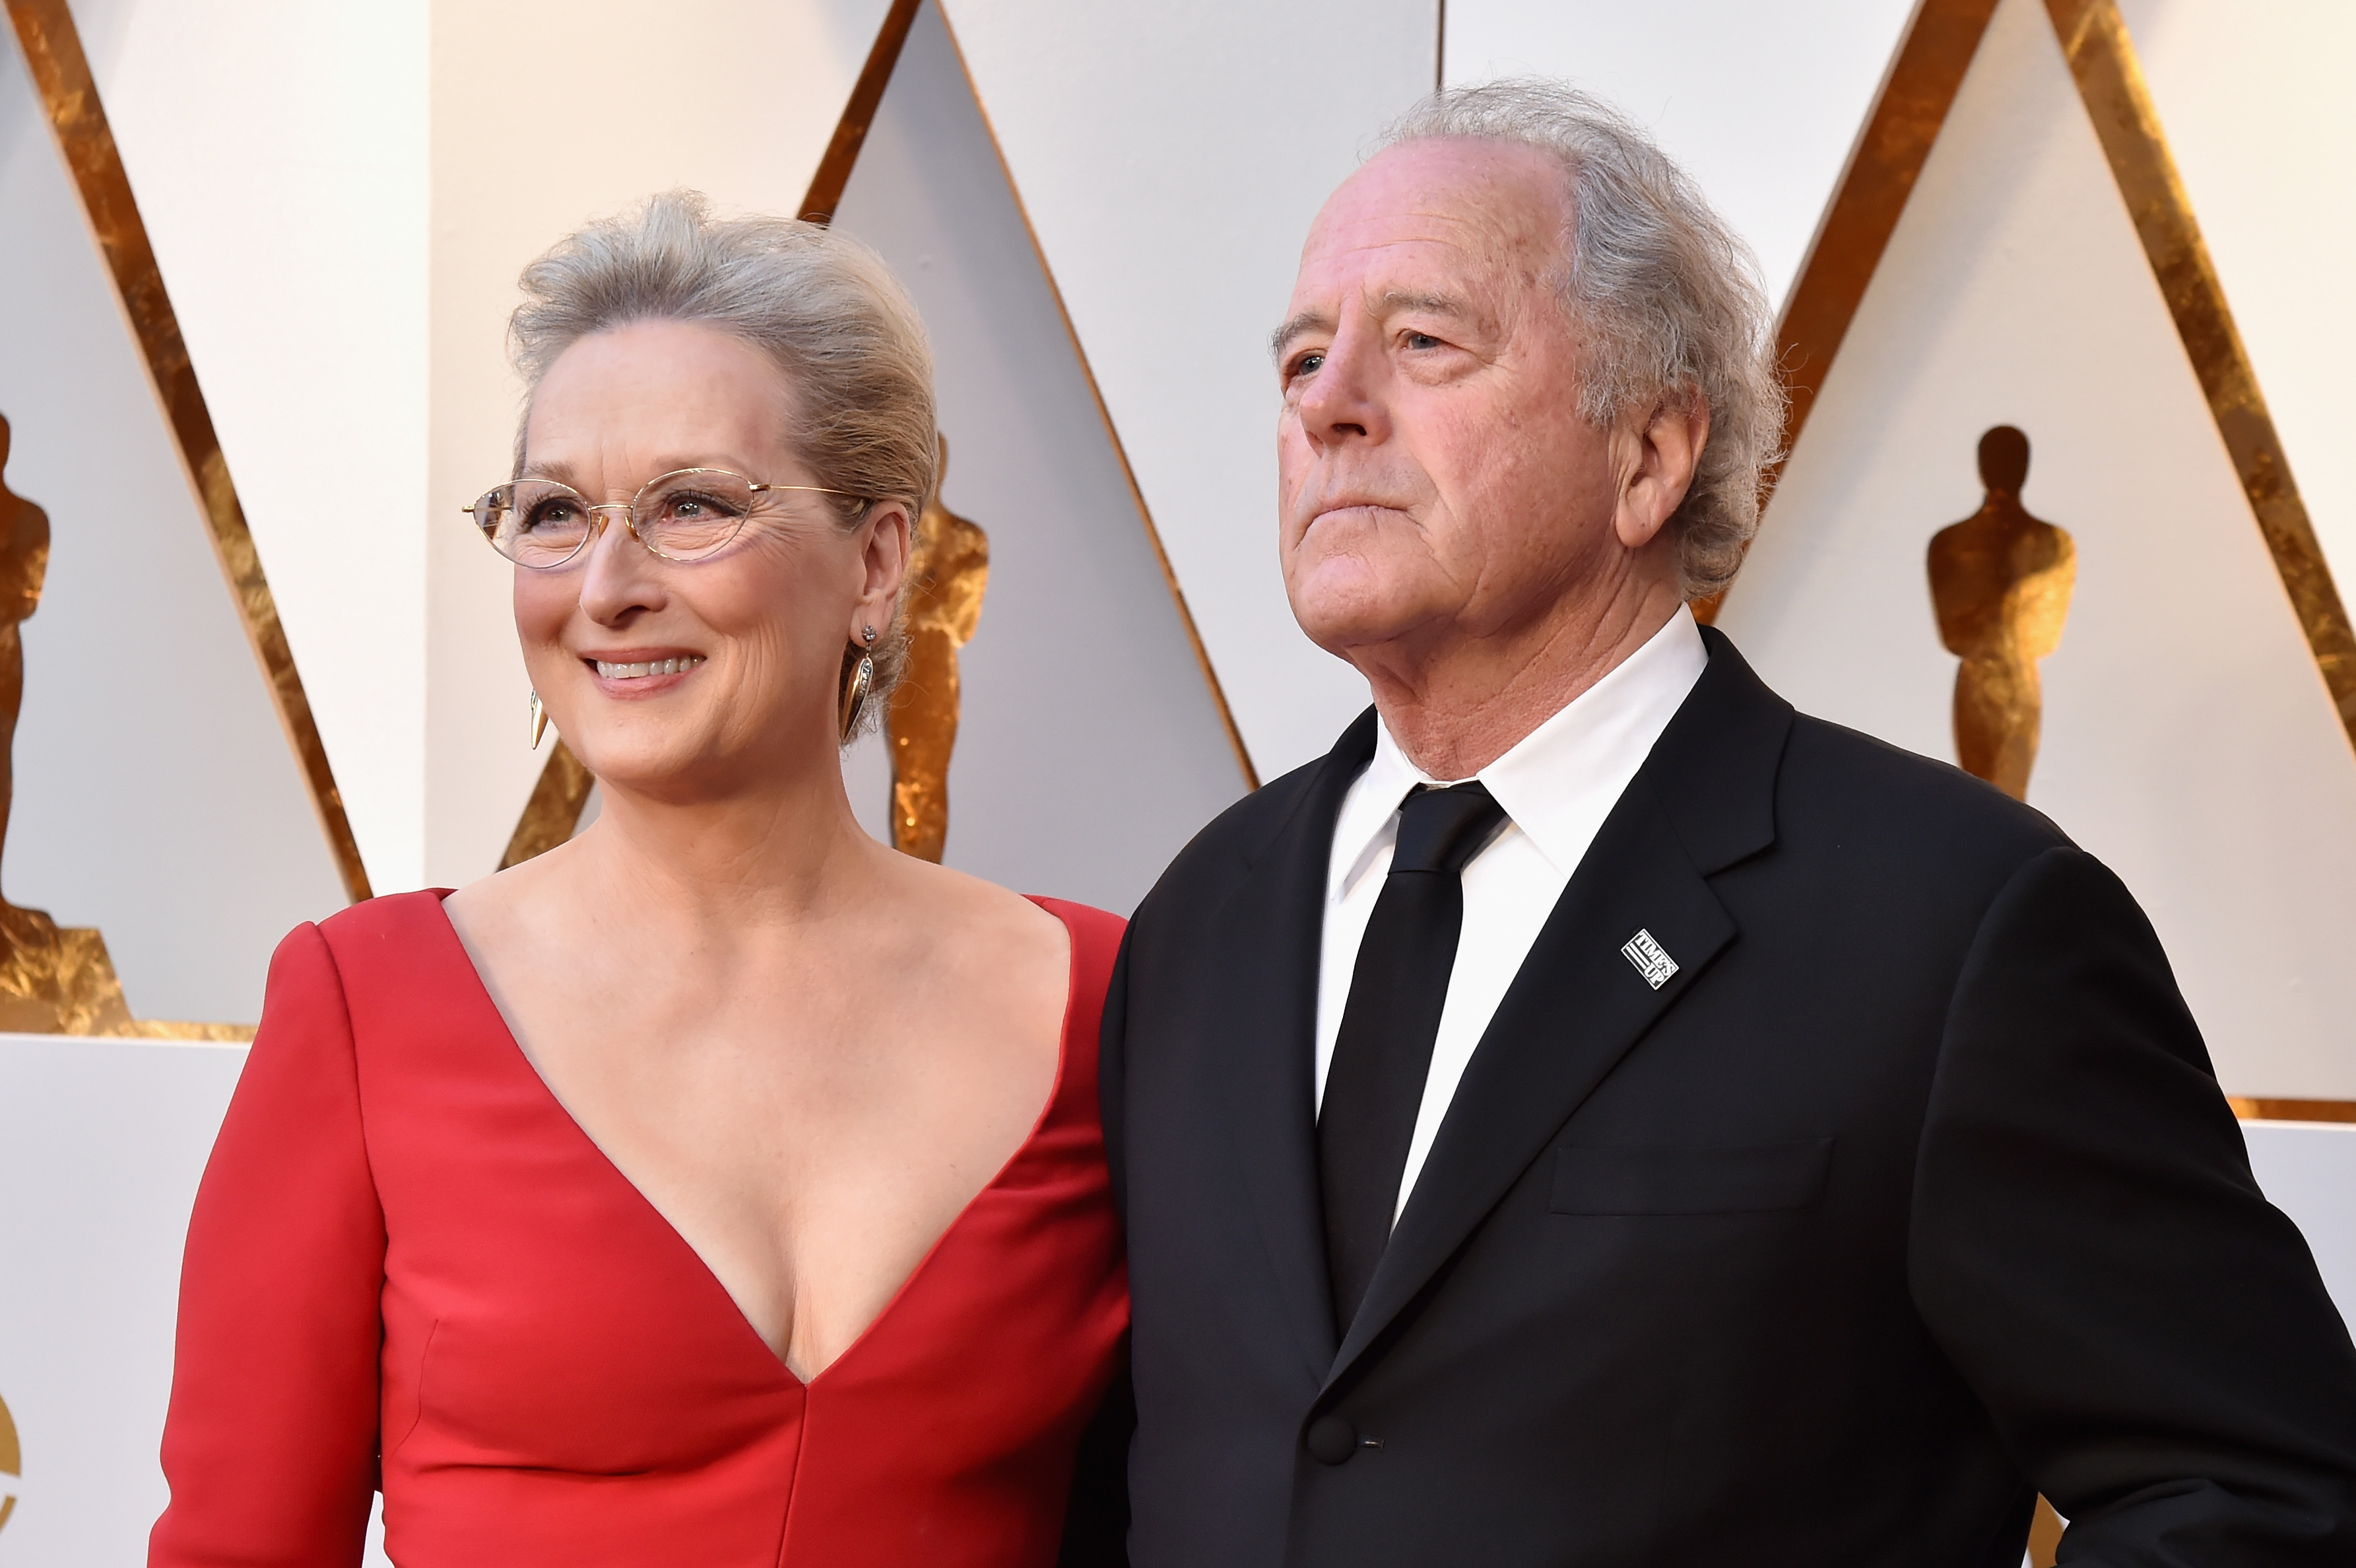 Meryl Streep (L) and Don Gummer attend the 90th Annual Academy Awards at Hollywood & Highland Center on March 4, 2018 in Hollywood, California. | Source: Getty Images